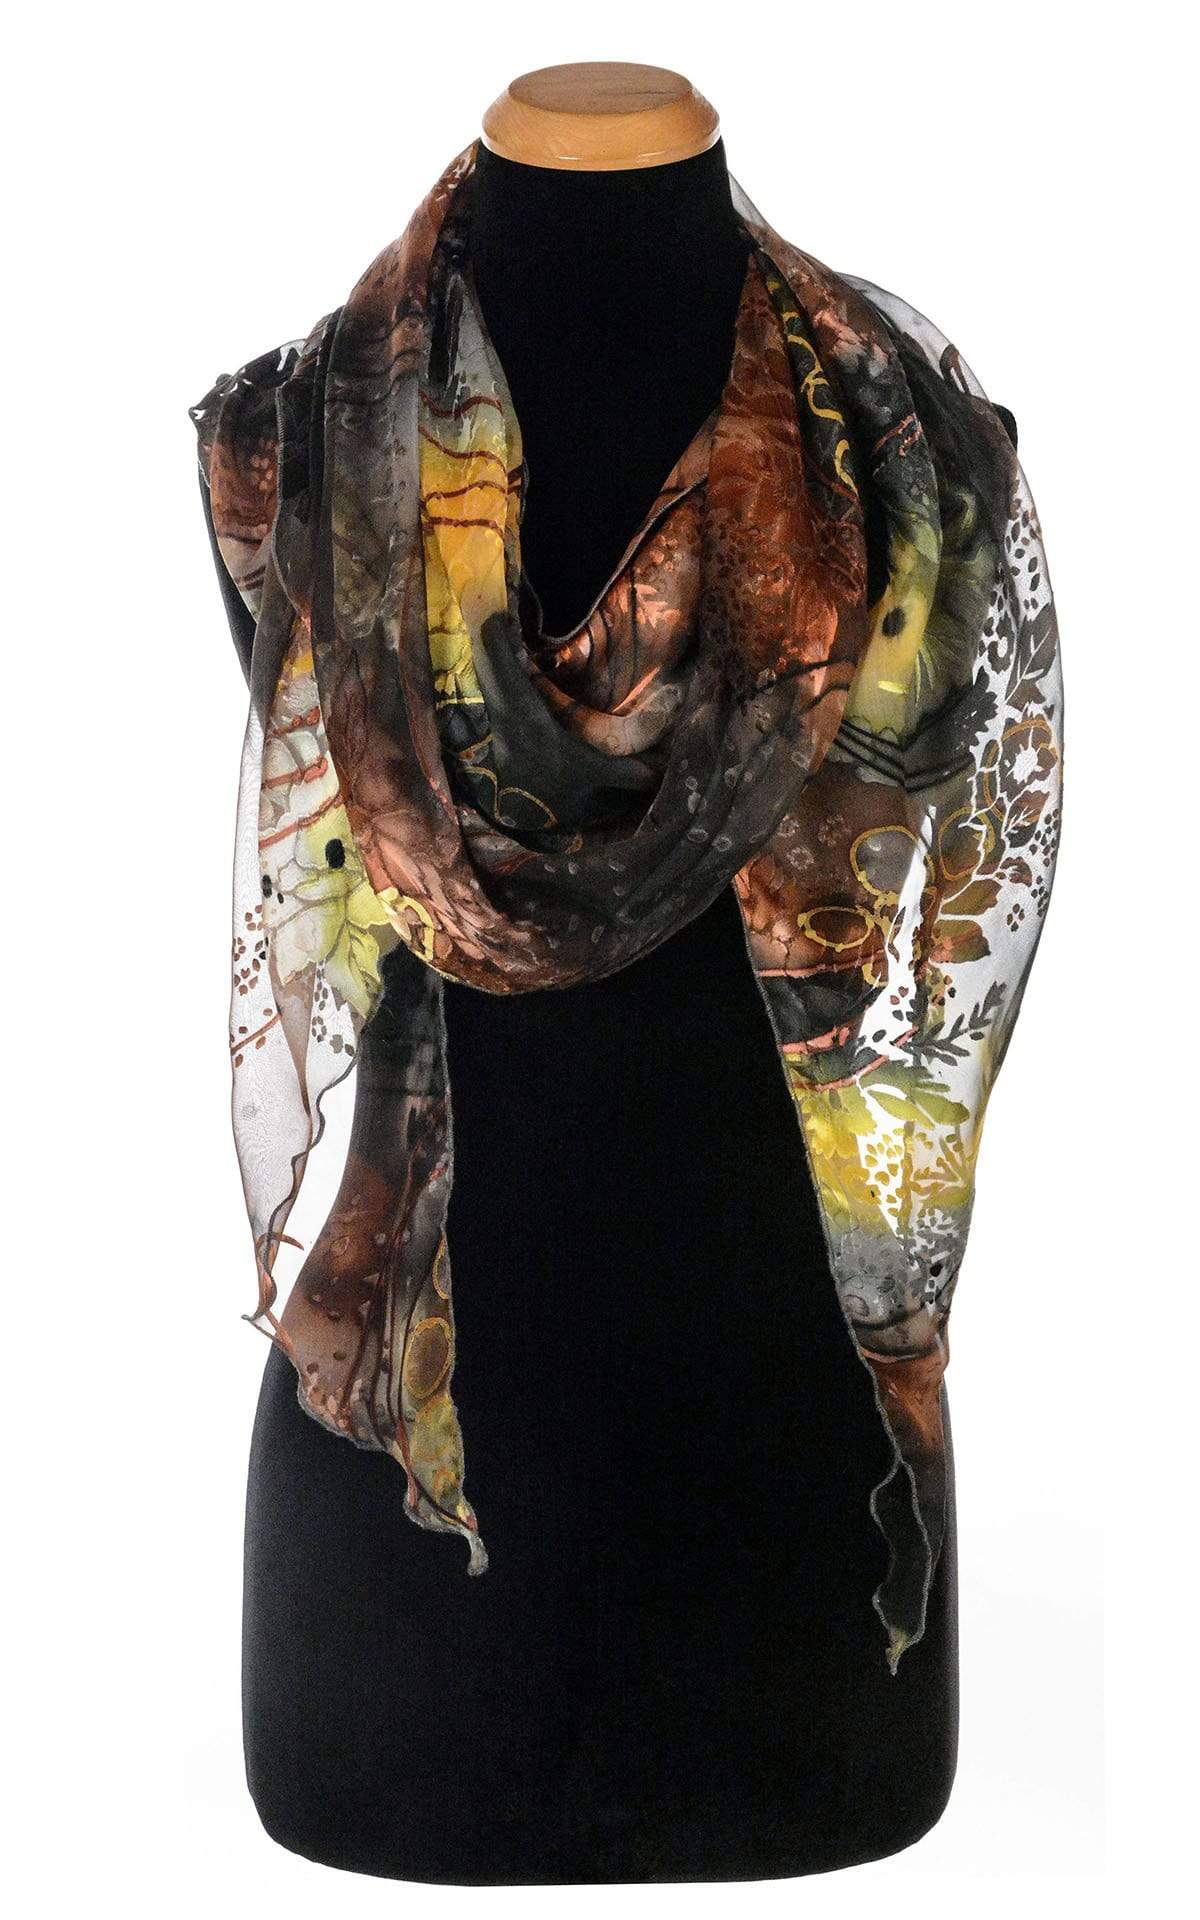 Women’s Large Handkerchief Scarf, Wrap in hand-painted silk on mannequin | Garden Path in Tiger Lily black, green, rust, yellow, and Gray | Handmade in Seattle WA | Pandemonium Millinery